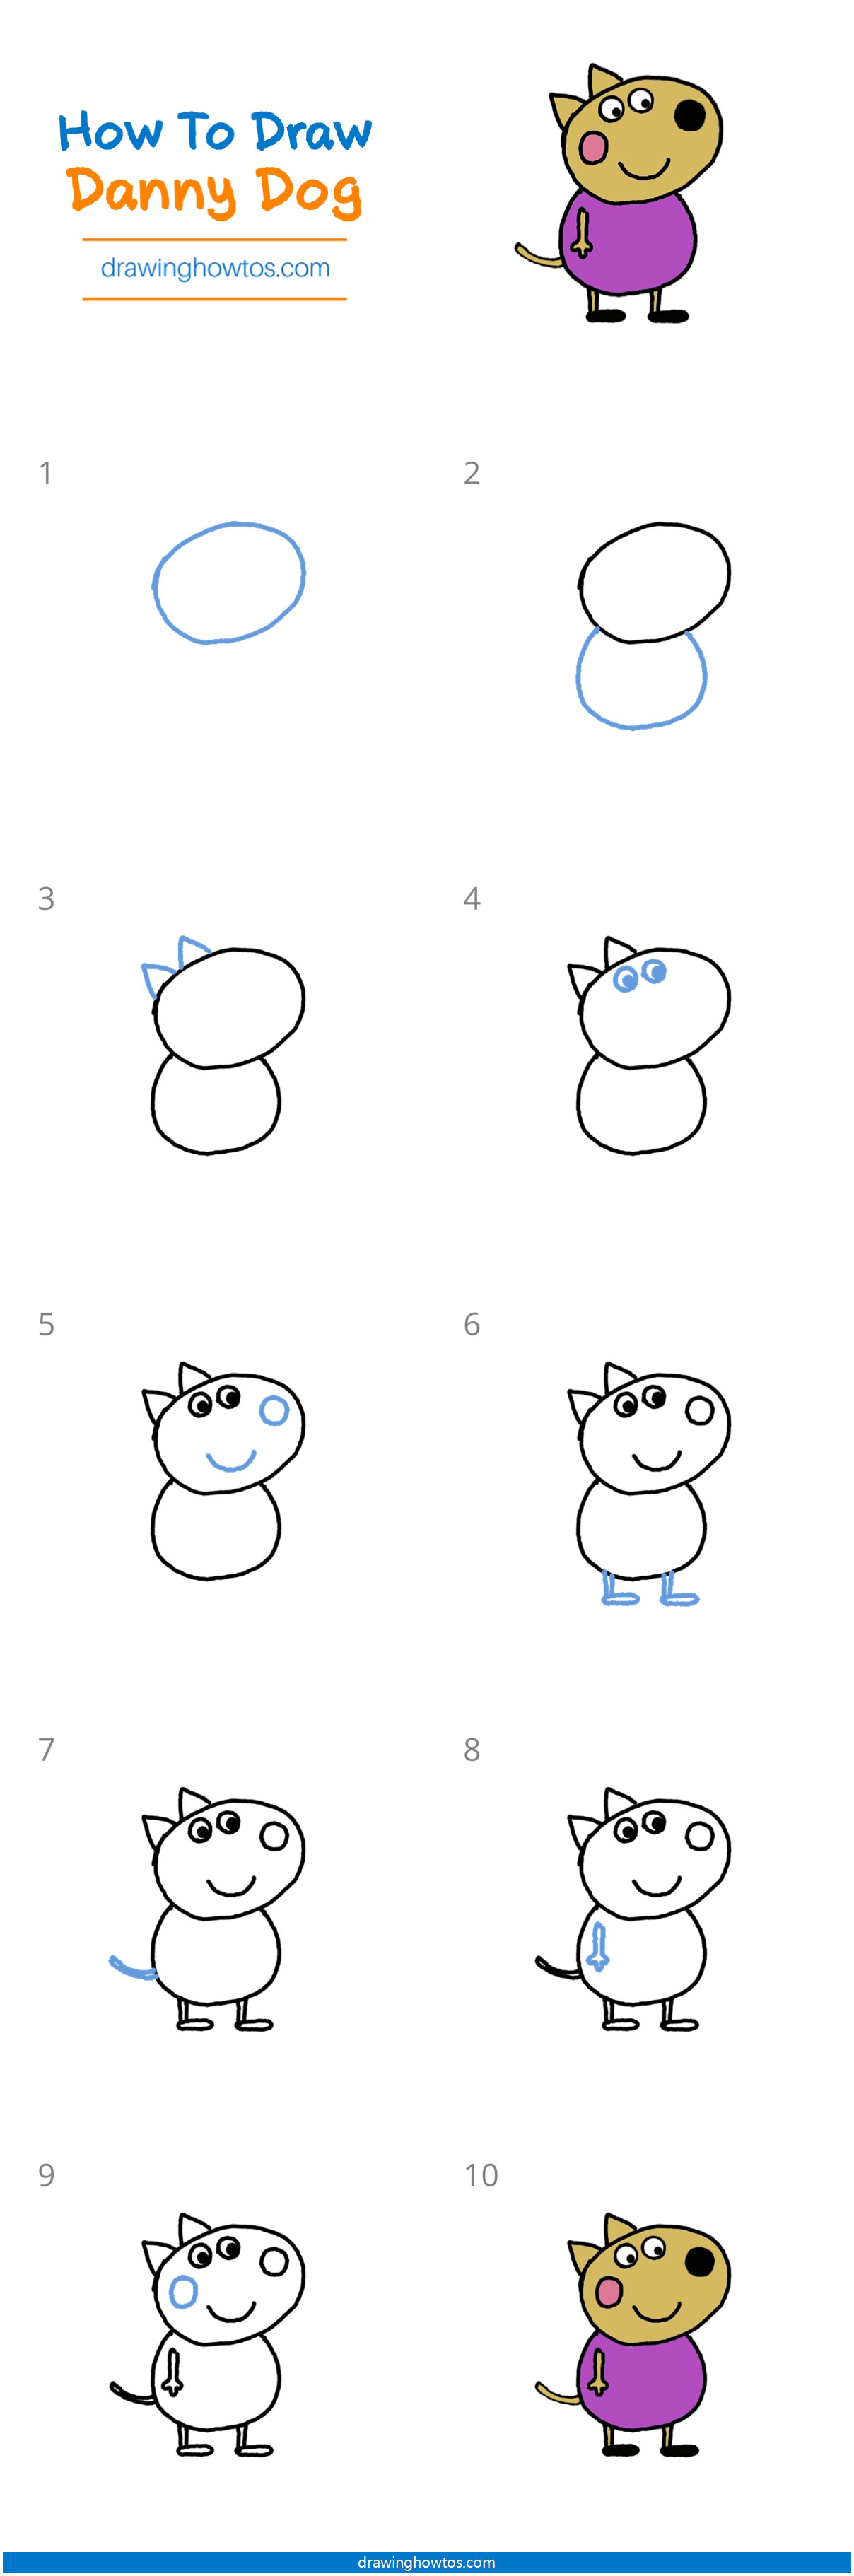 Download How To Draw Danny Dog From Peppa Pig - Step by Step Easy ...